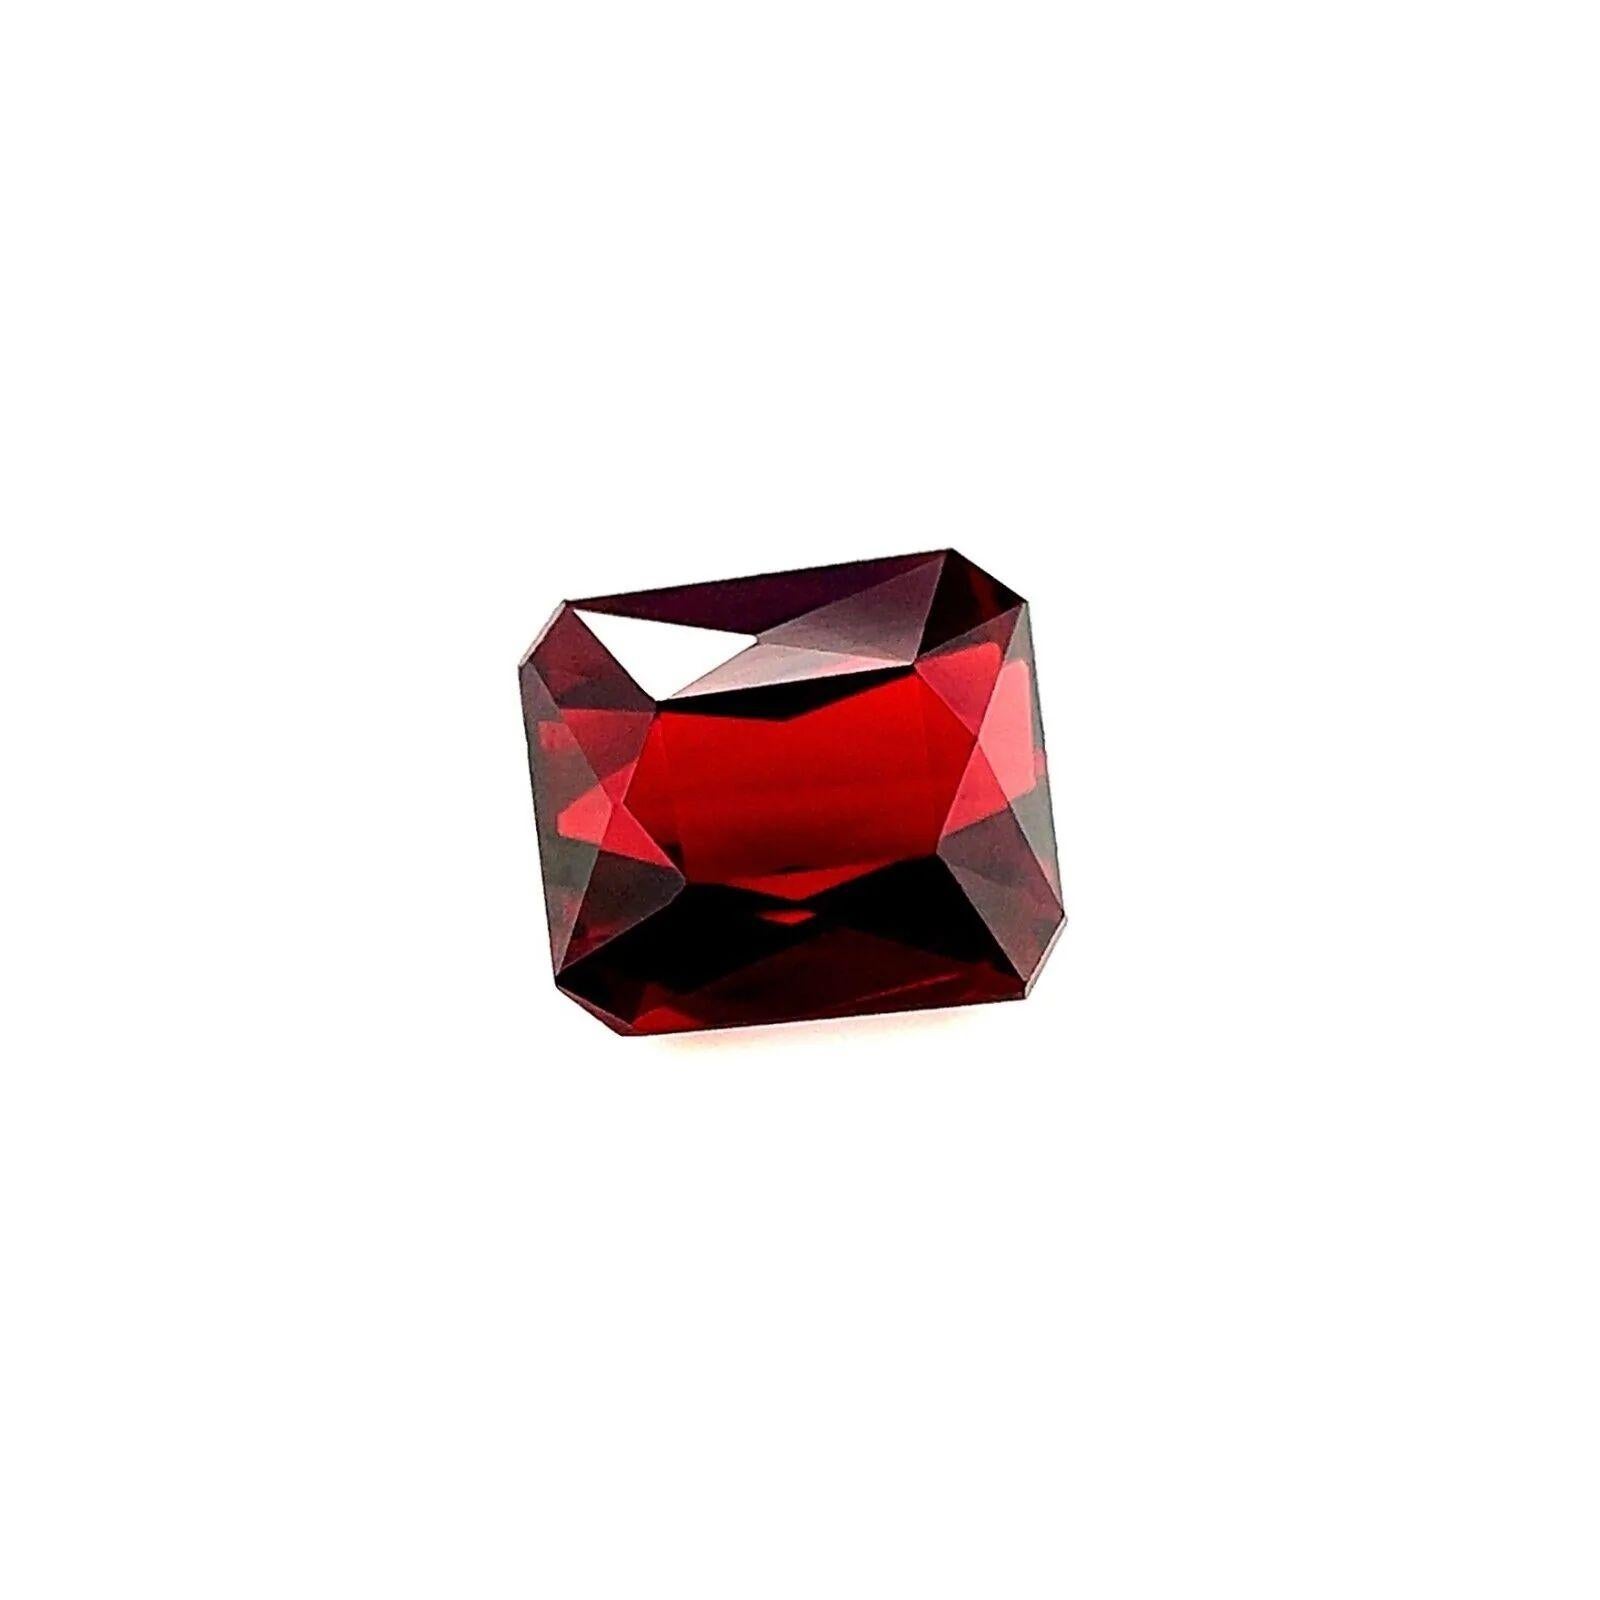 Natural 2.42ct Vivid Purple Red Rhodolite Garnet Scissor Cut 7.5x6.6mm VVS Gem

Natural Loose Rhodolite Garnet Gemstone.
2.42 Carat with a beautiful vivid purple red colour and good clarity, a clean stone with only some small natural inclusions